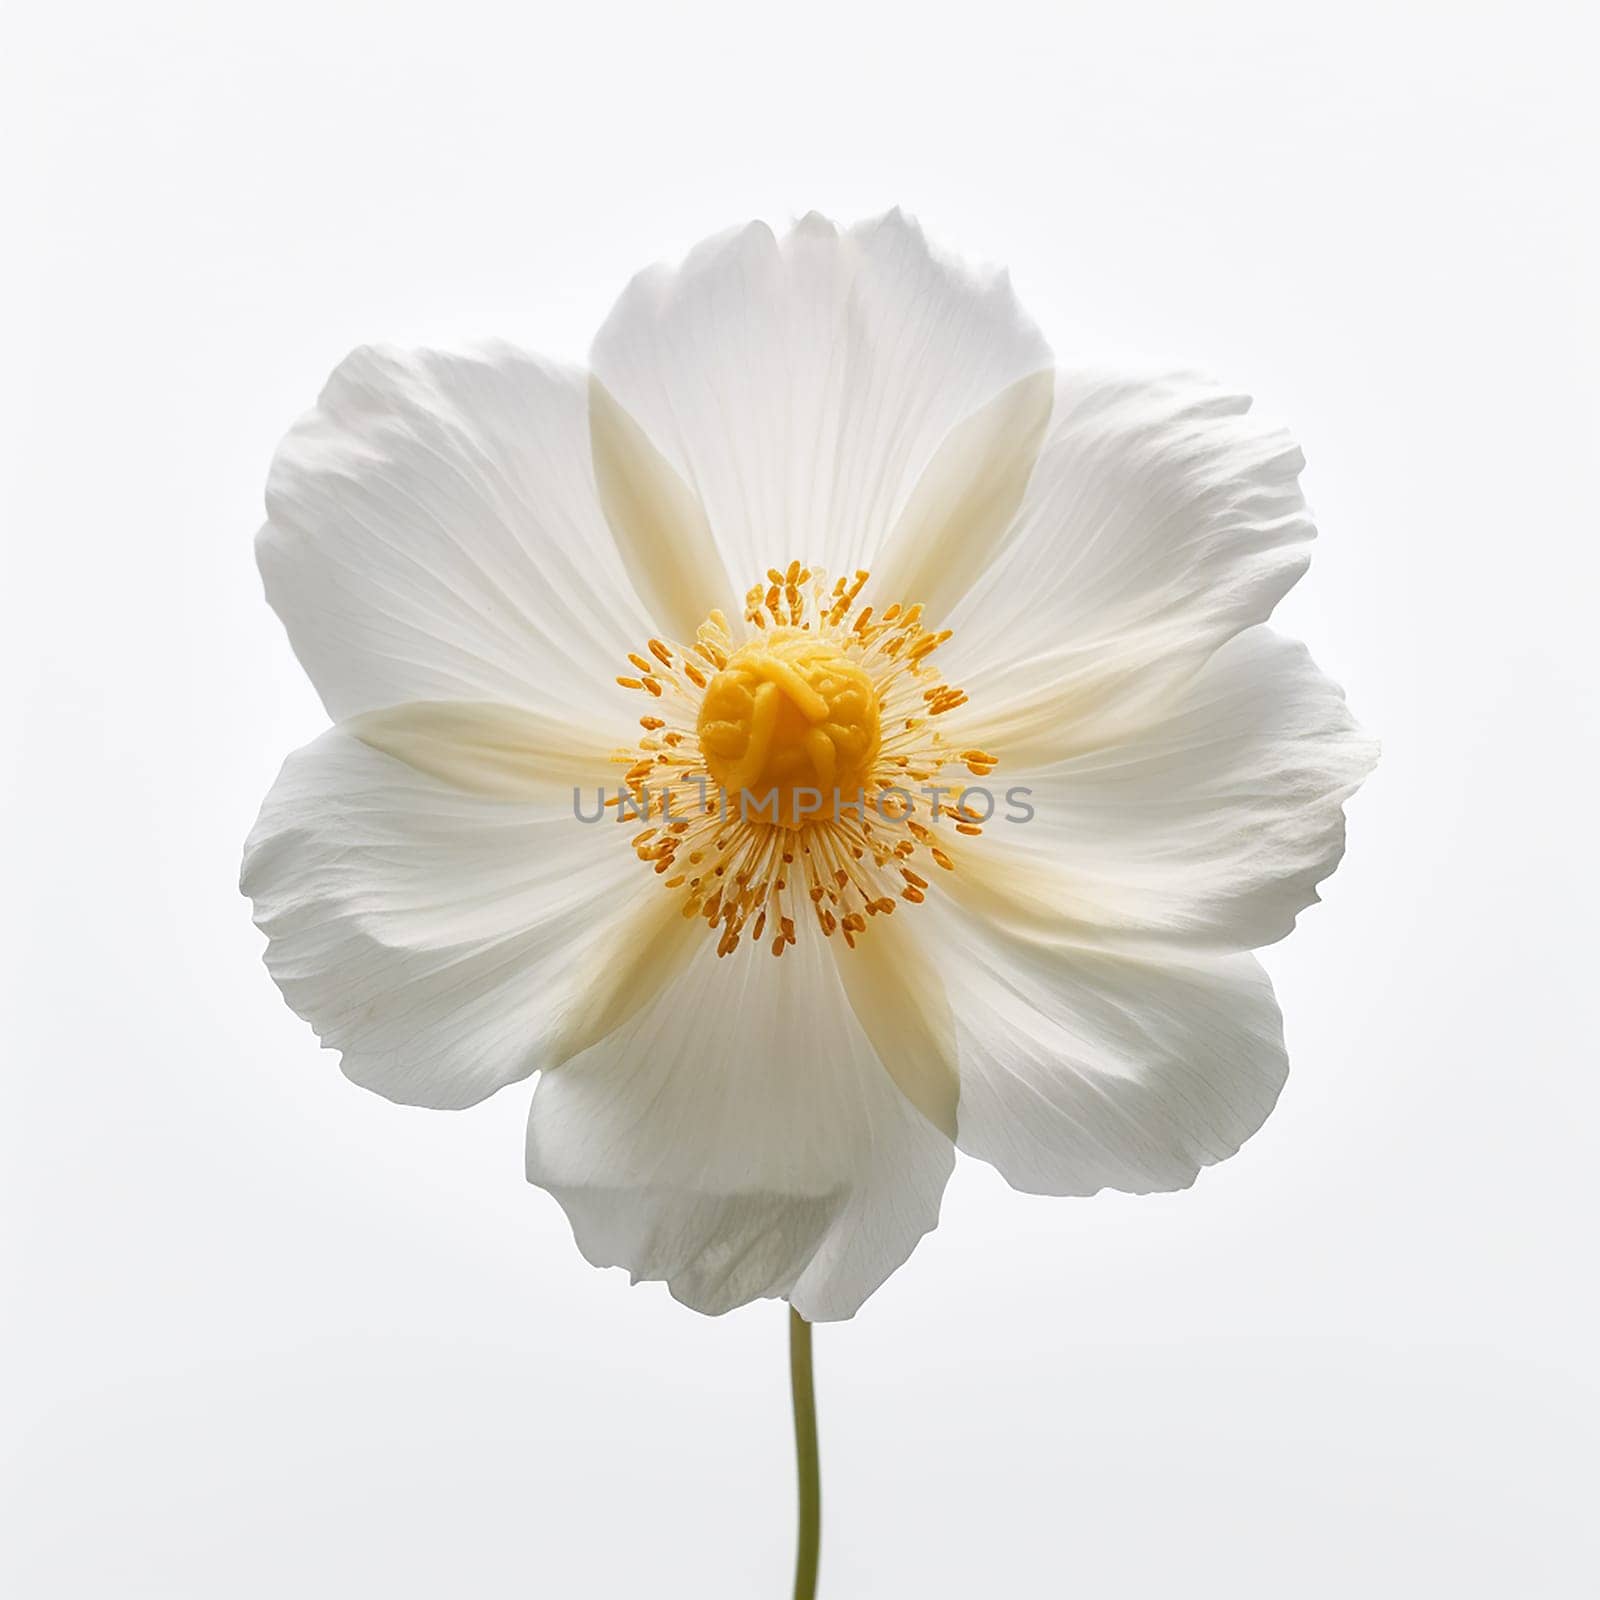 A single white flower with a yellow center against a plain background by Hype2art